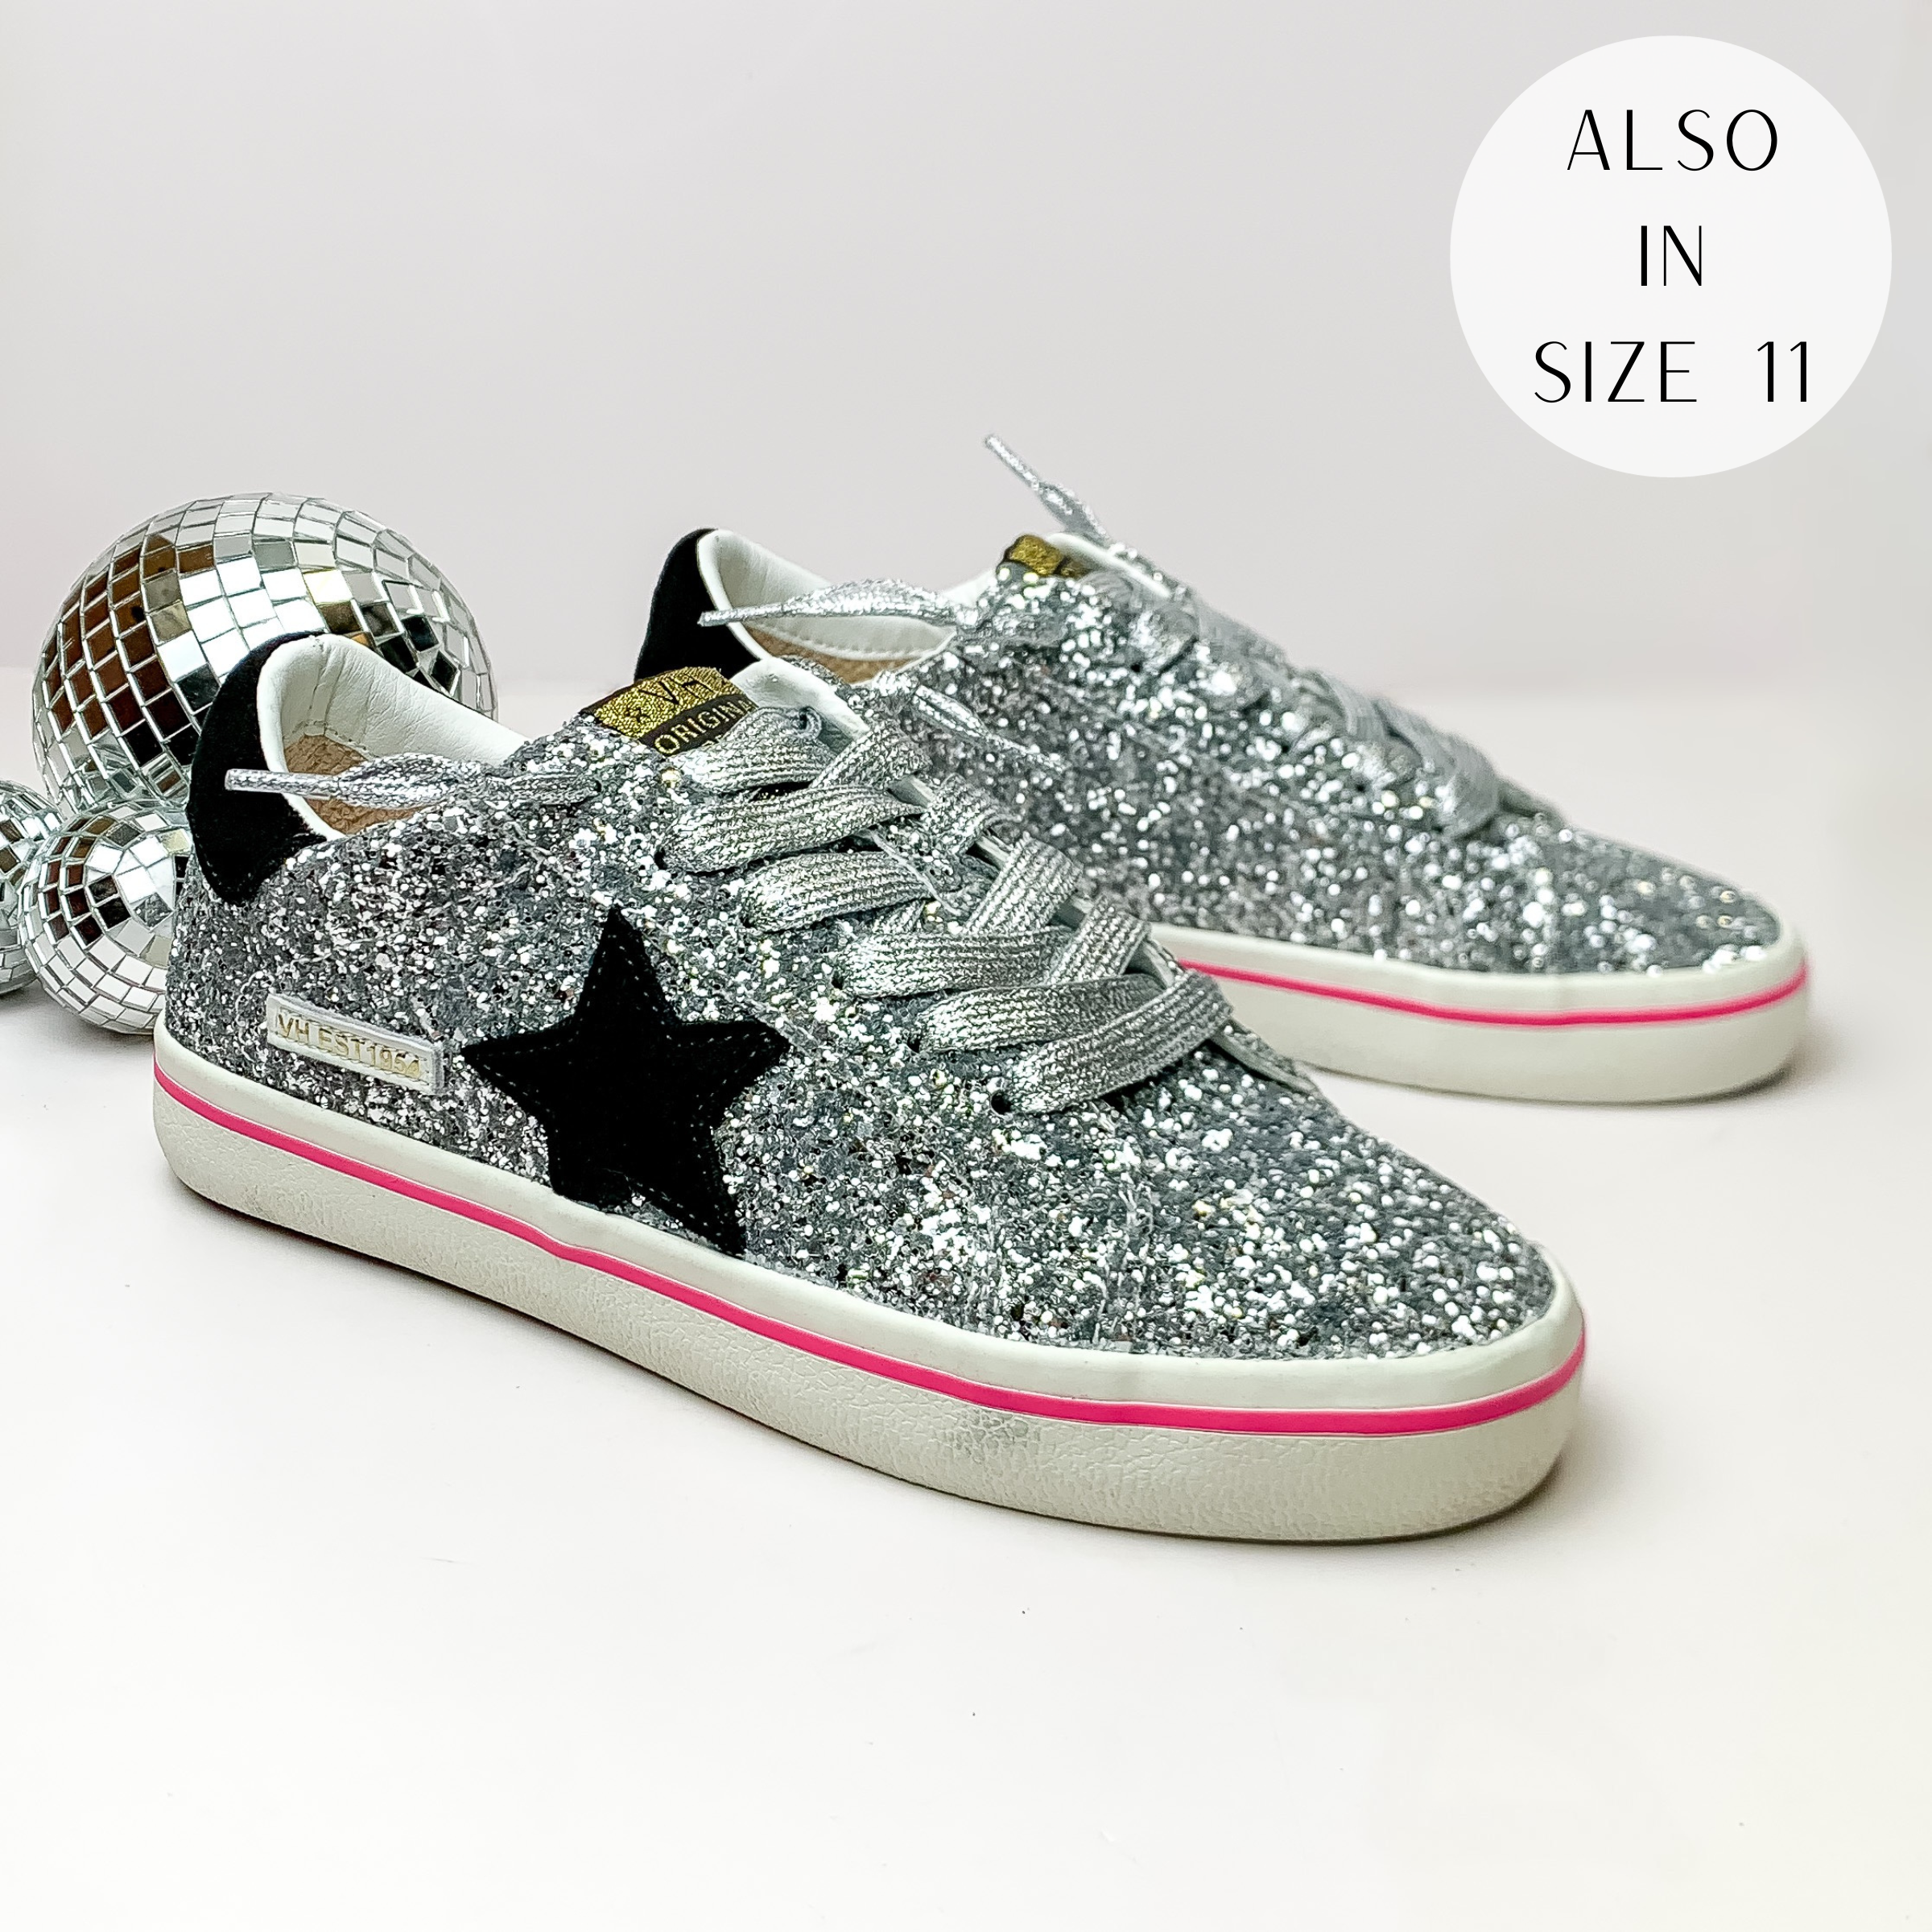 Pictured is a pair of silver glitter tennis shoes with black detailing. These shoes include a black heel, a black star on the side, and silver laces. These shoes are pictured on a white background with disco balls on the left side